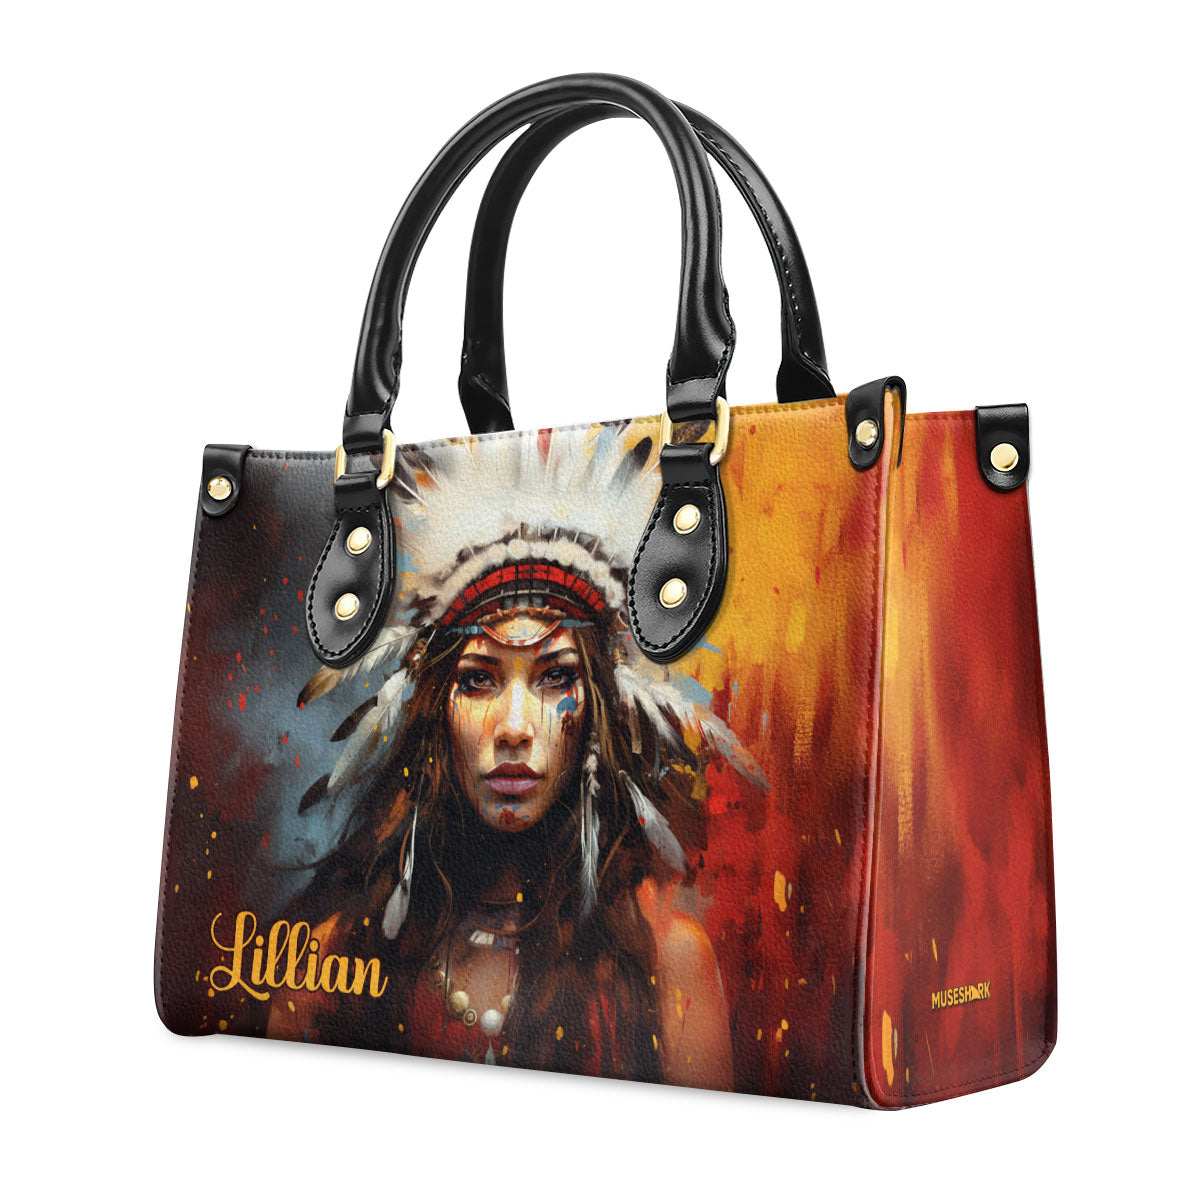 Native American Girl - Personalized Leather Handbag MS111